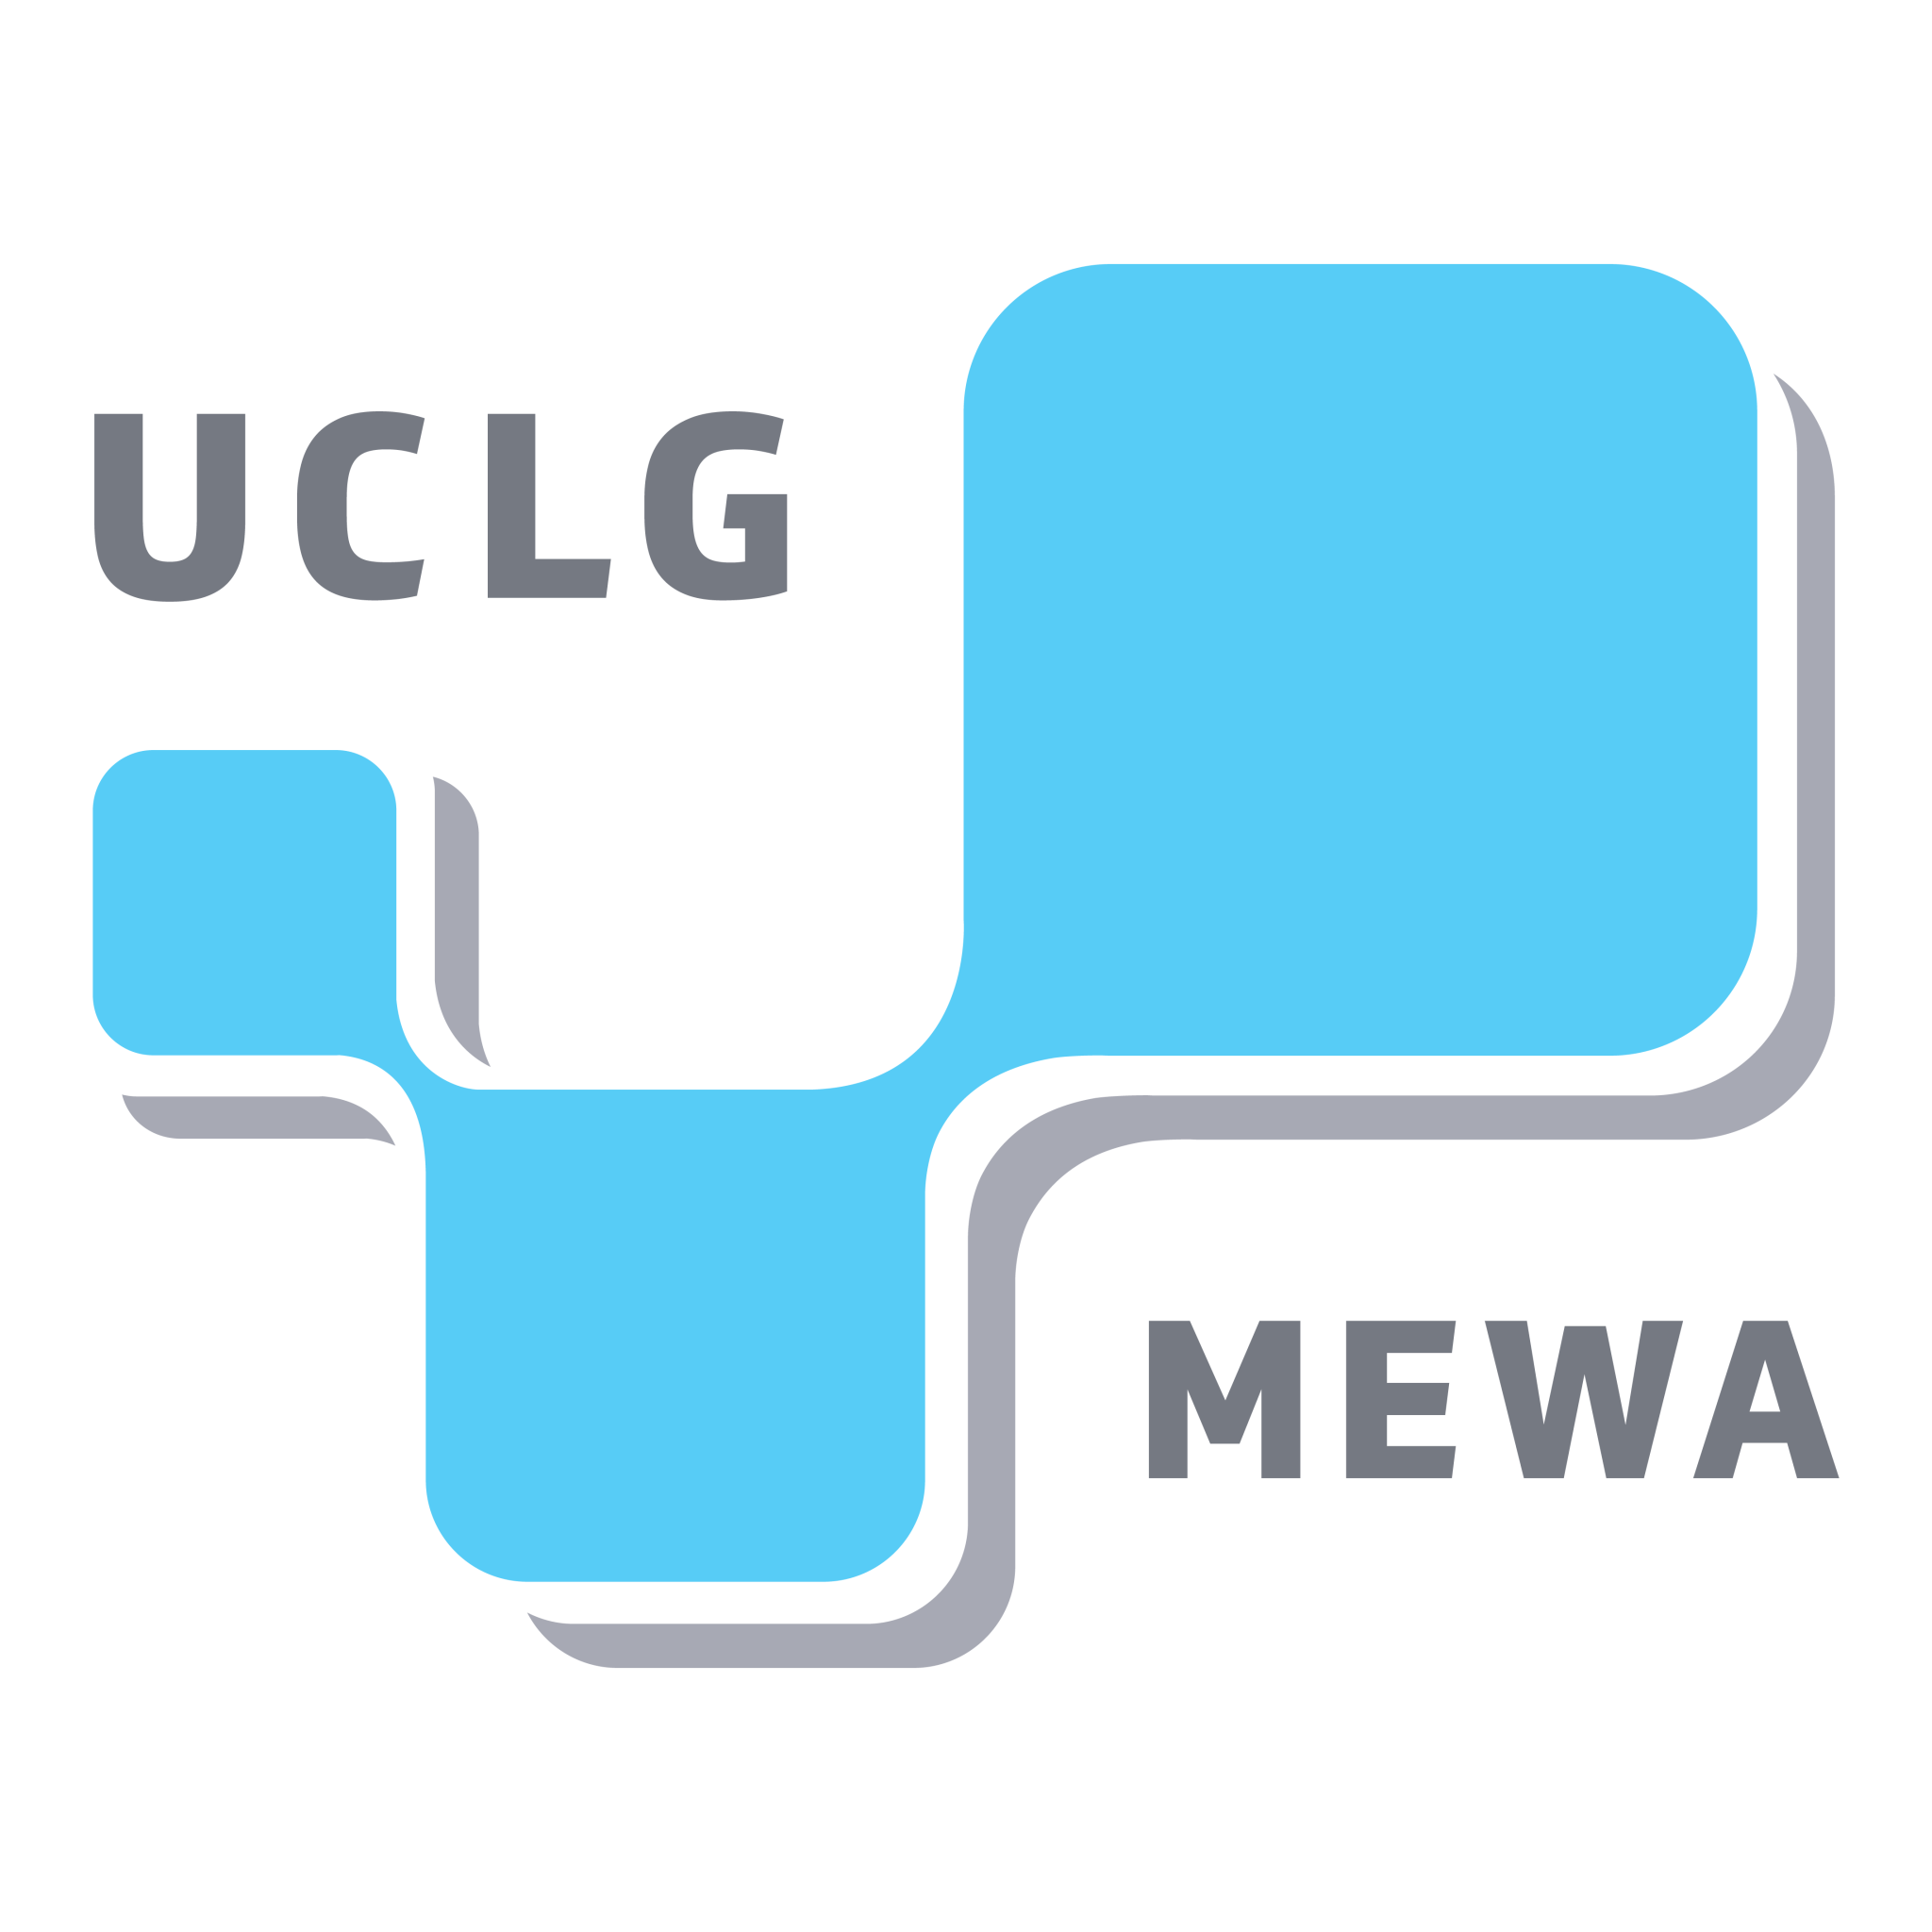 UCLG-MEWA (United Cities and Local Governments Middle East and West Asia Region)